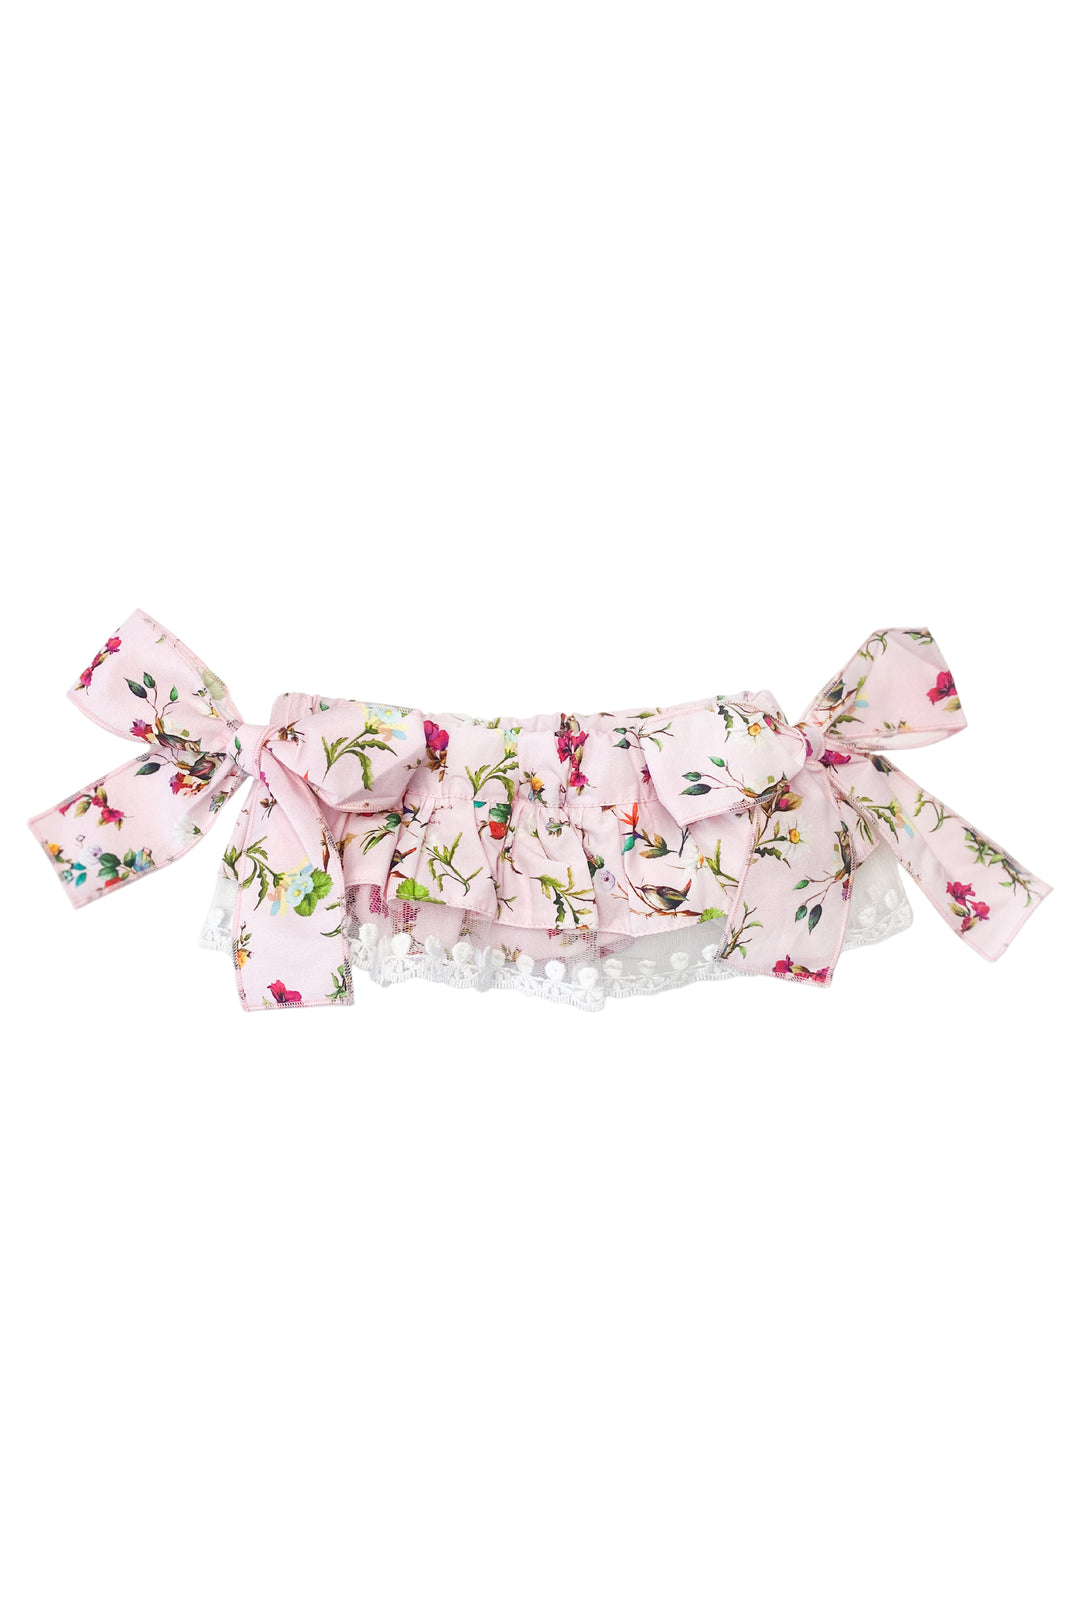 Phi "Lilah" Pink Floral Lace Bloomers | Millie and John